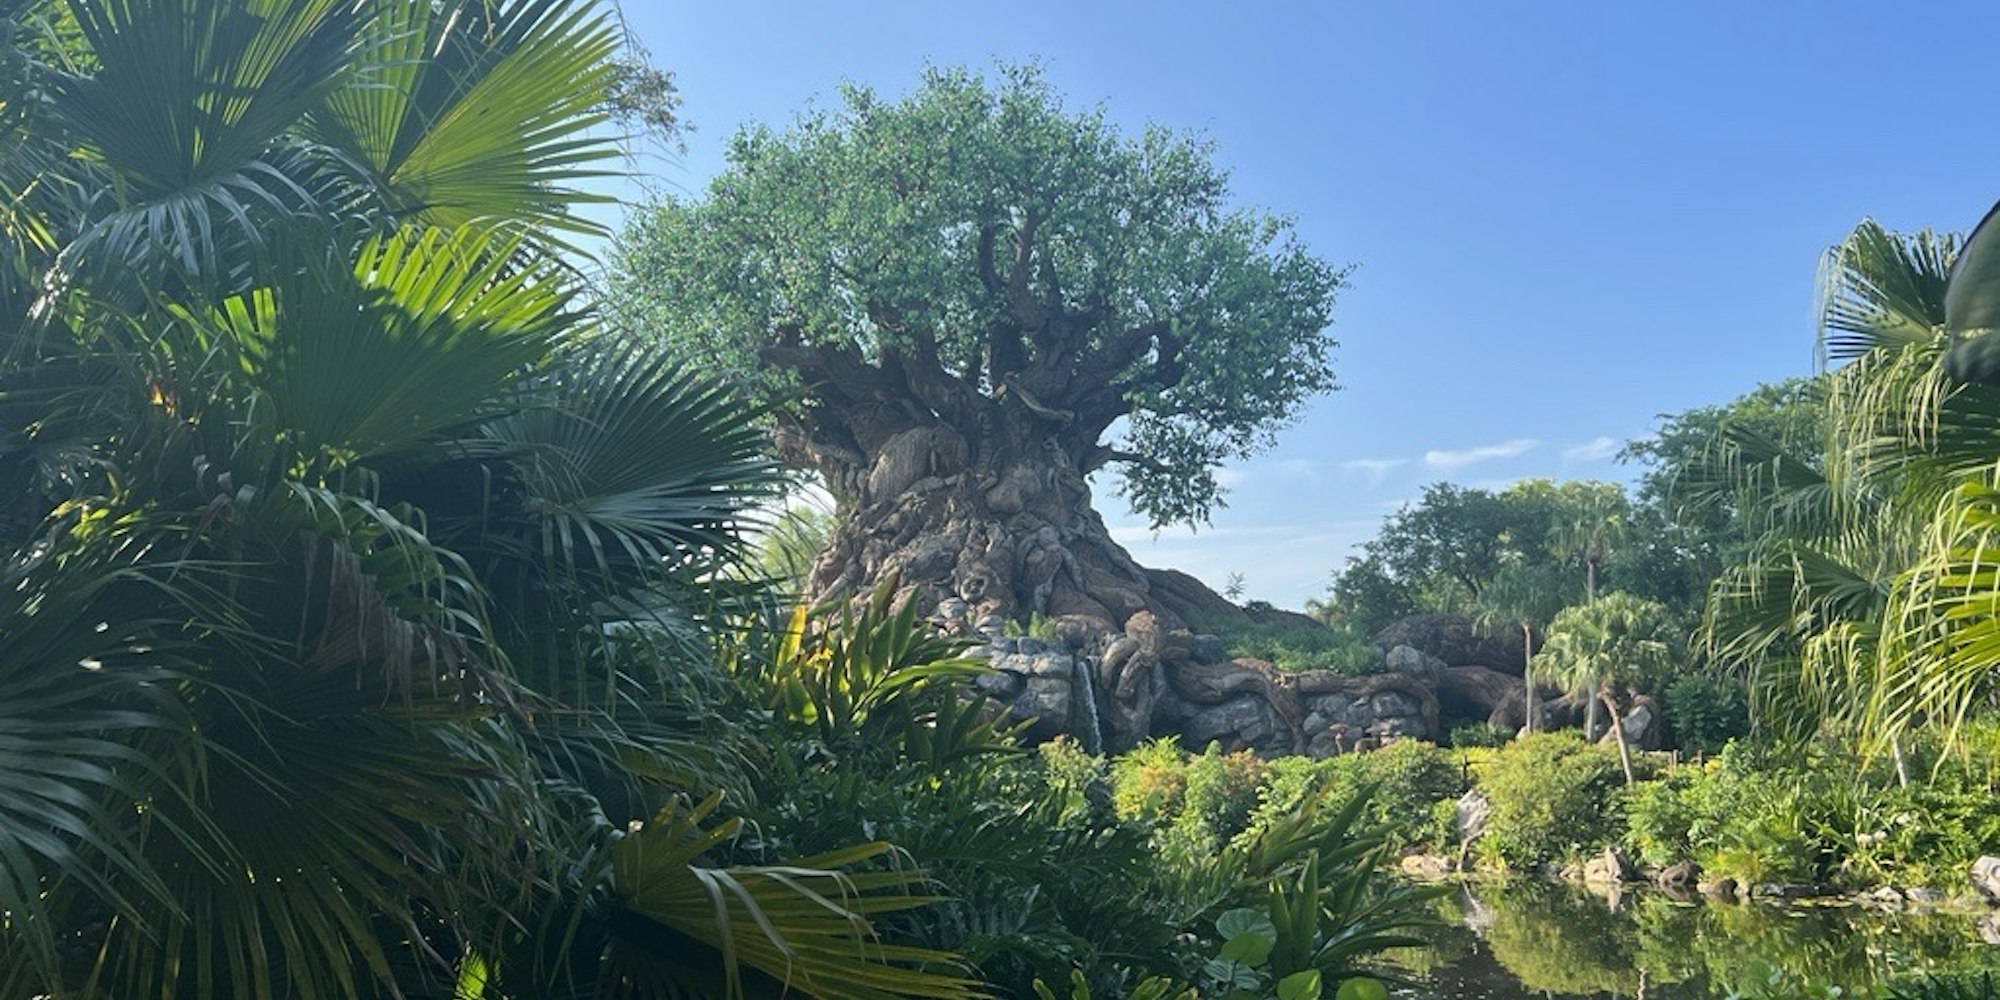 Cover Image for Celebrate Earth Day at Disney's Animal Kingdom